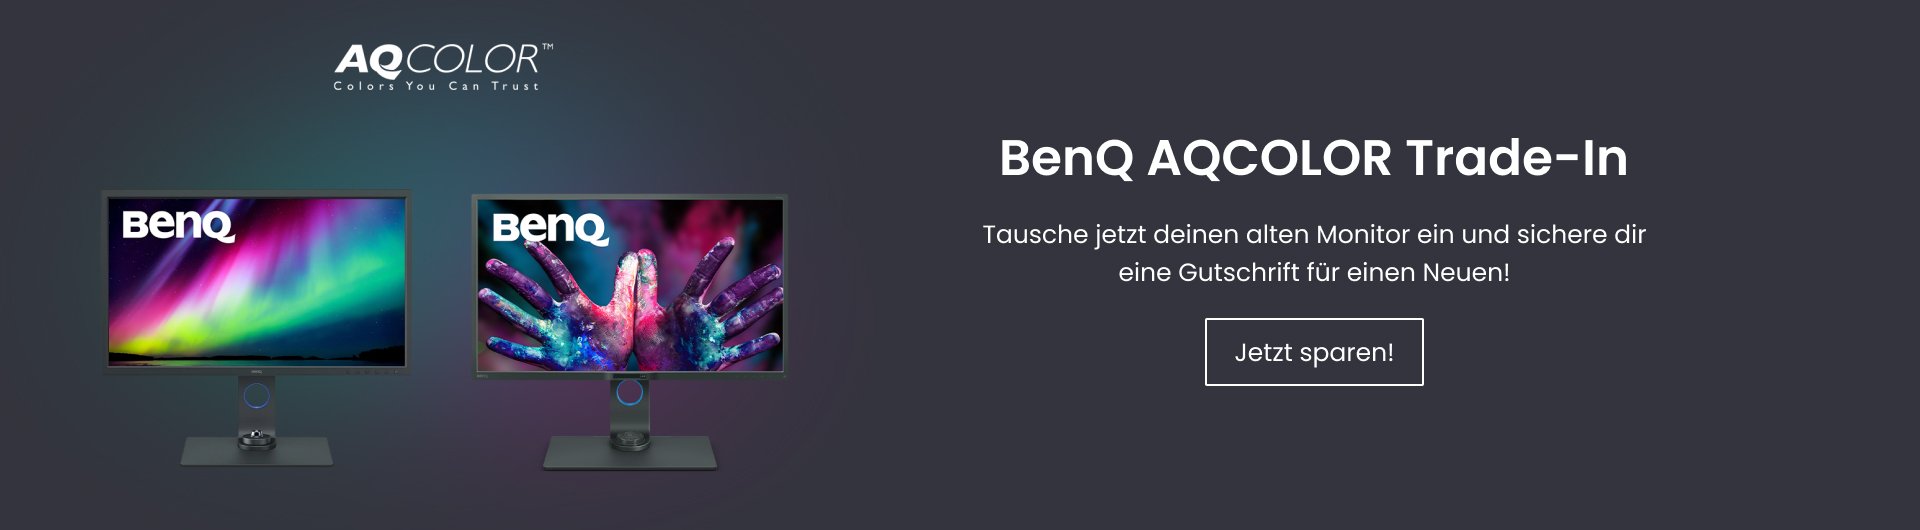 BenQ AQCOLOR Trade In